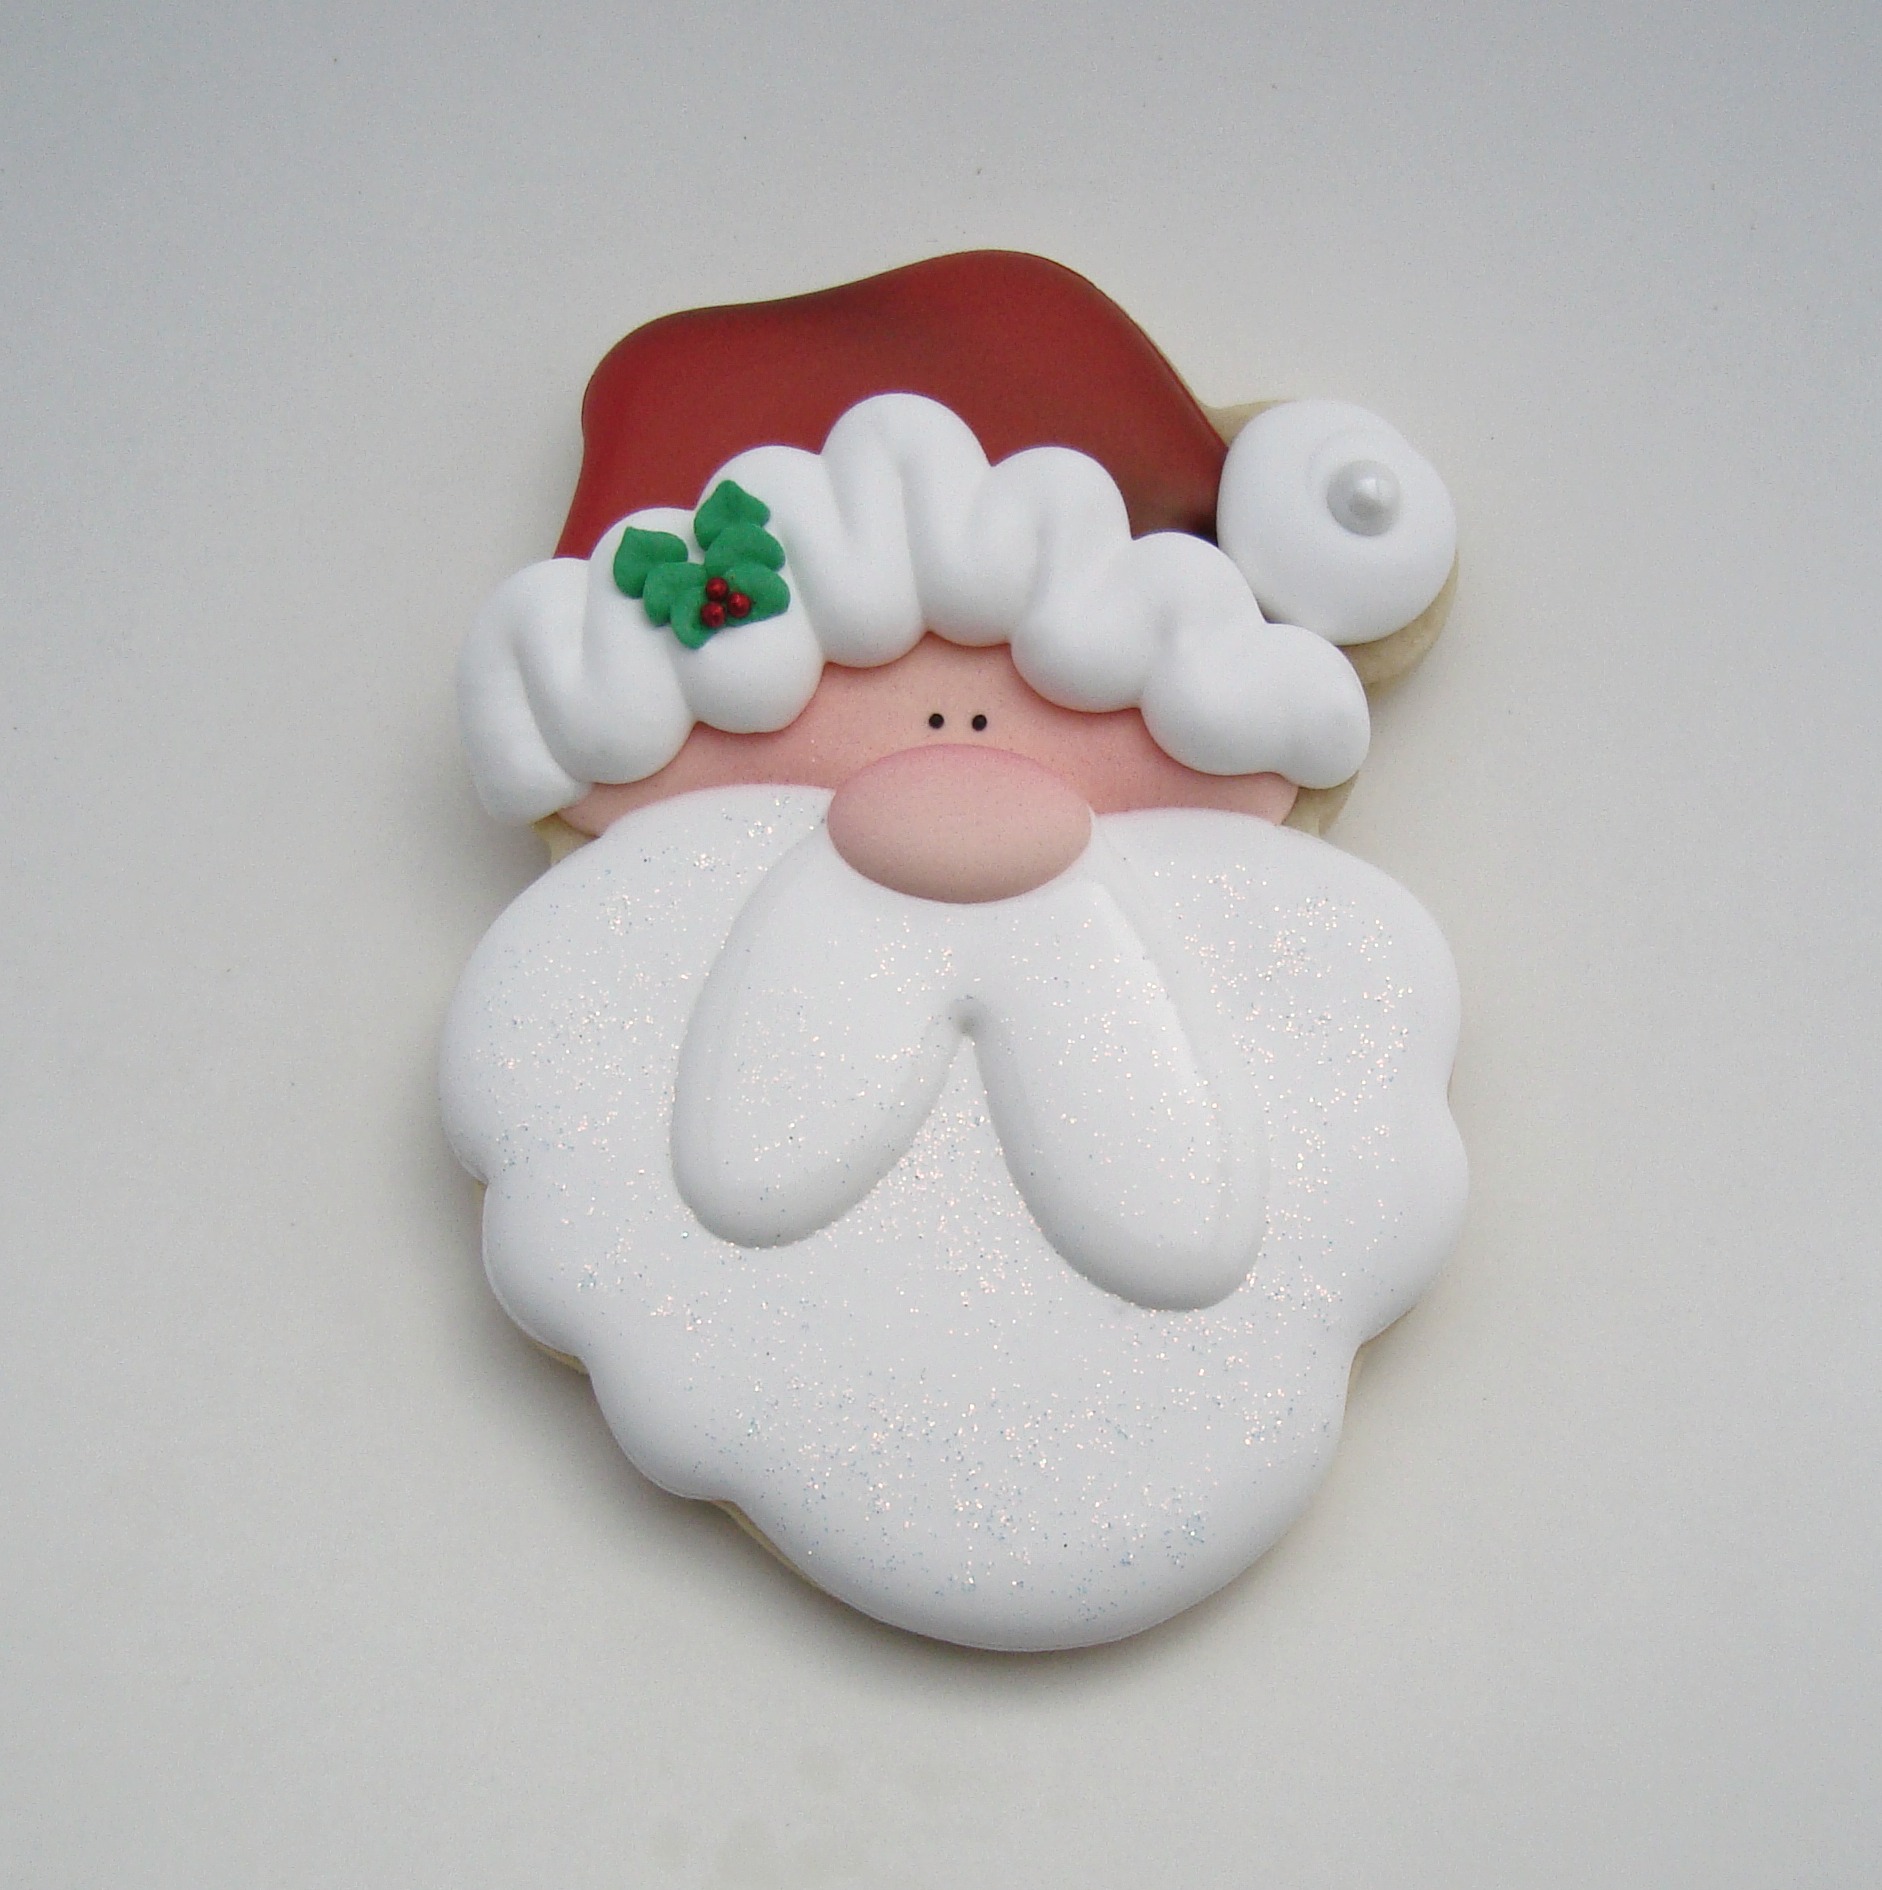 Remove the nose and holly transfers from the wax paper. Using the #12 Wilton tip and the